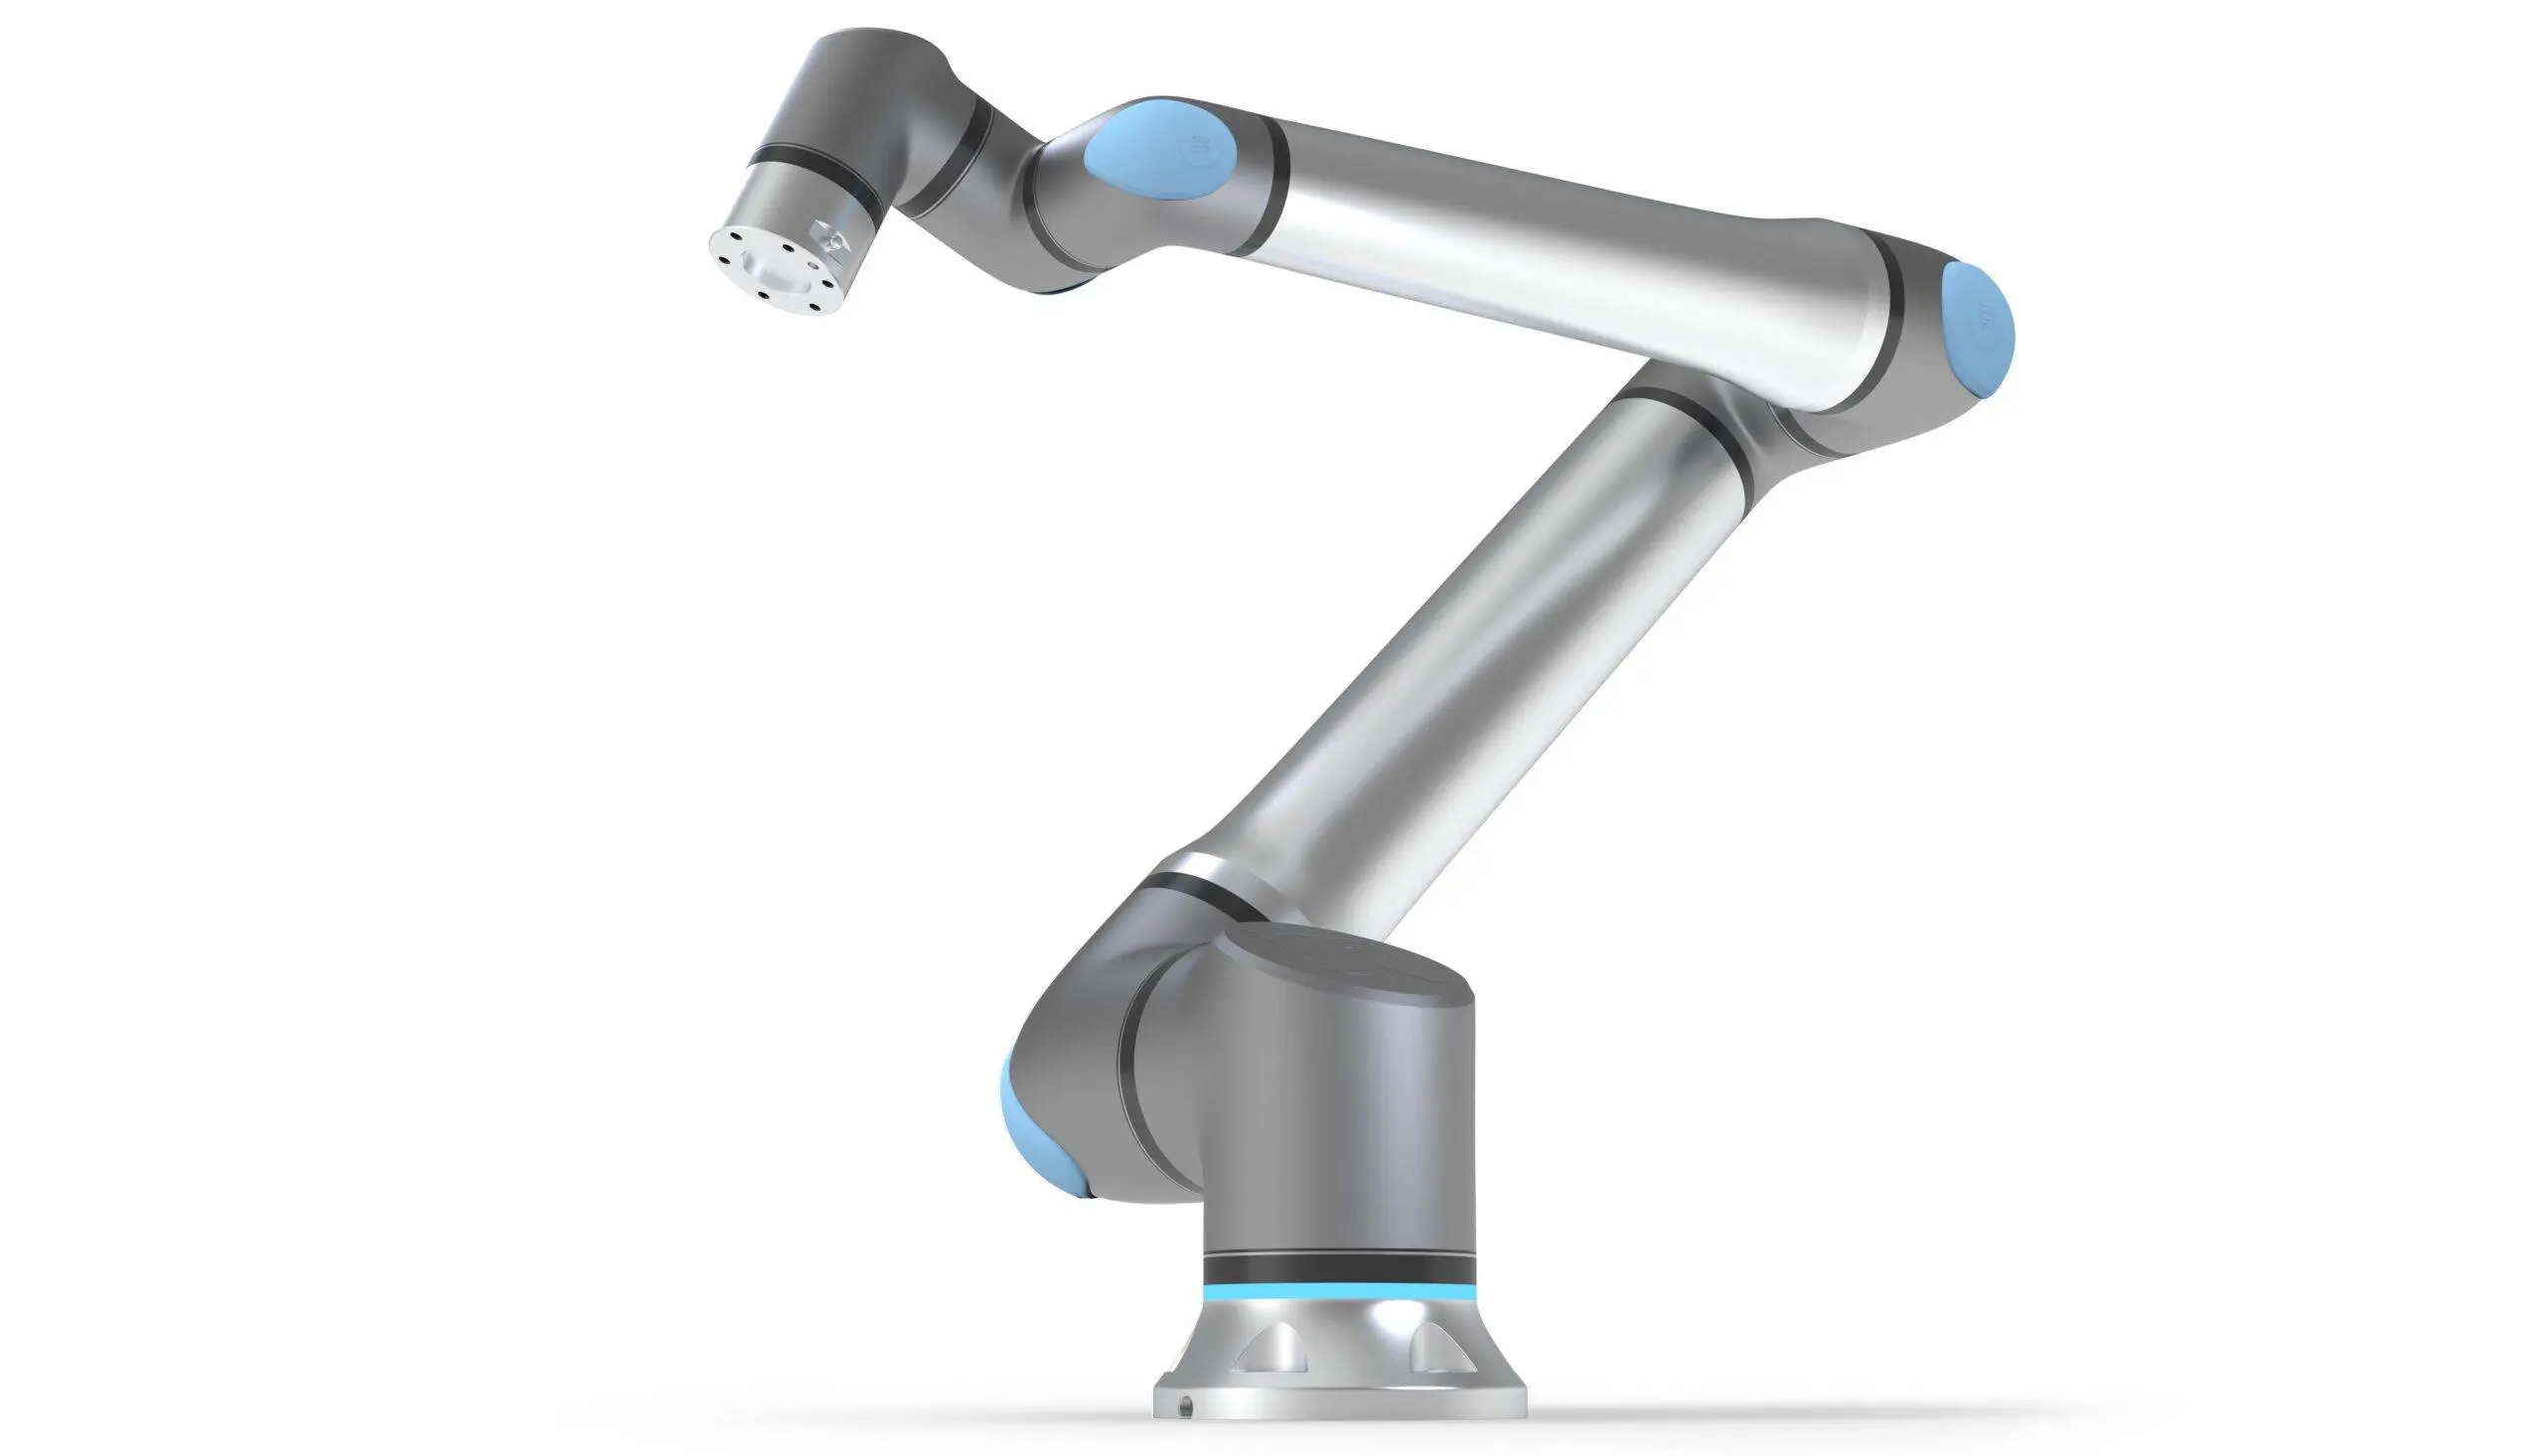 UR20 collaborative robot (cobot) on a white background